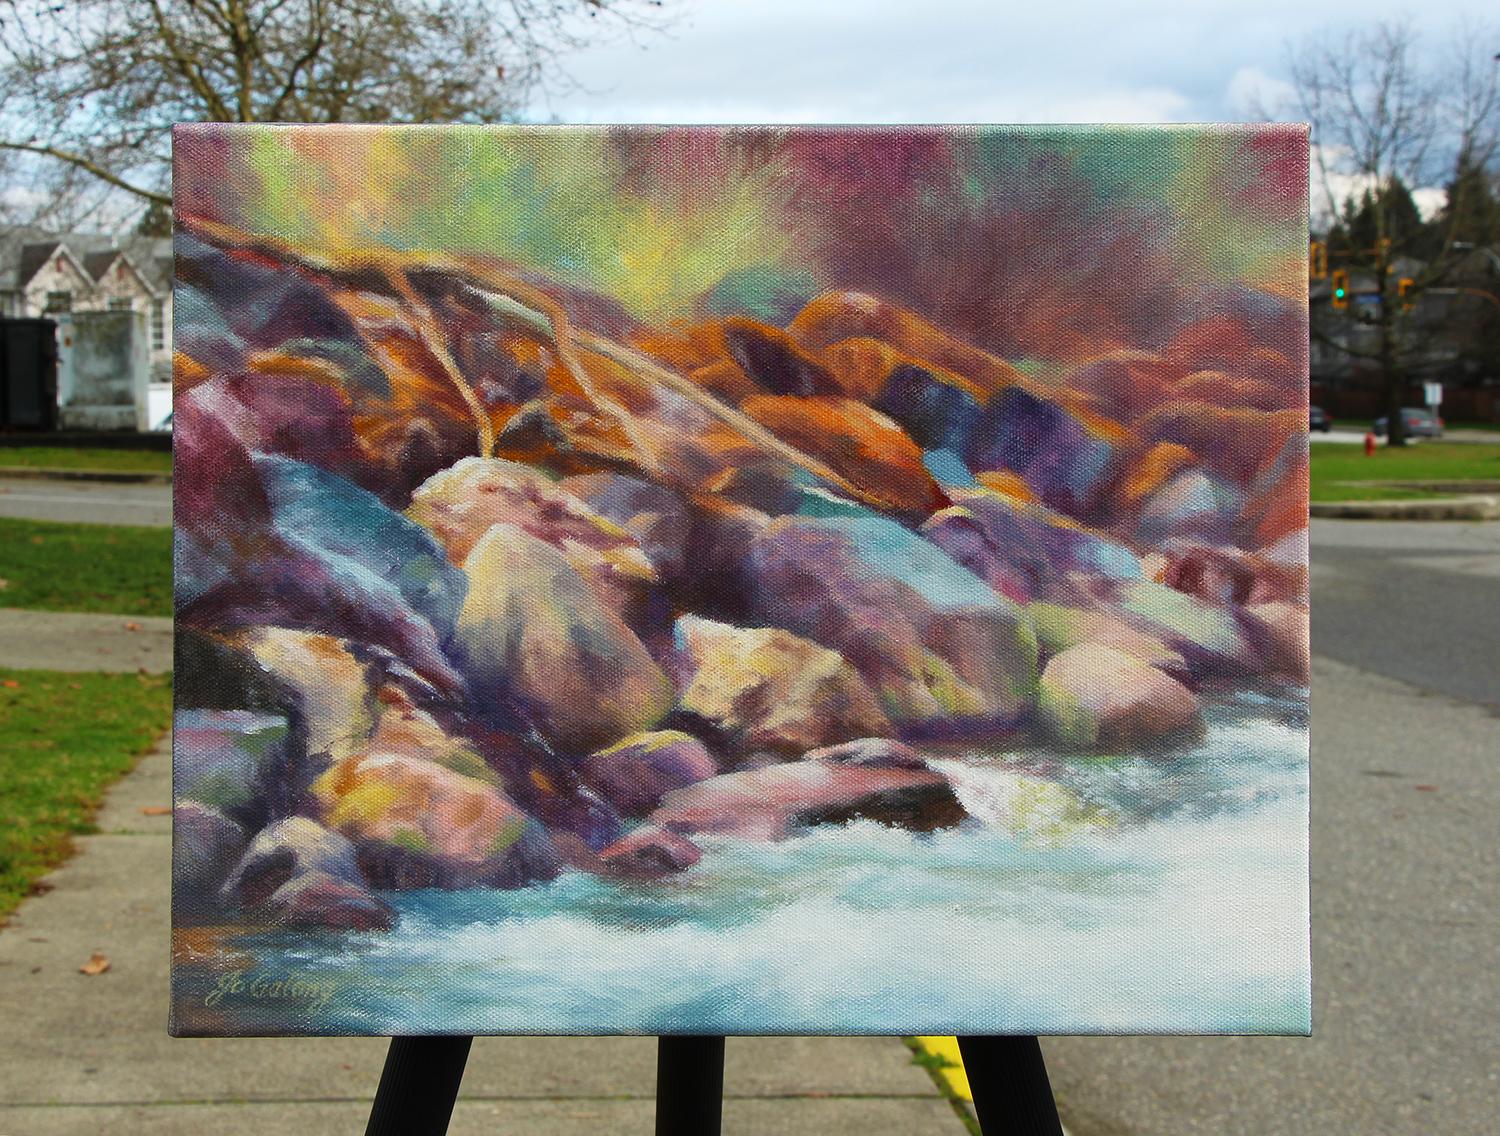 <p>Artist Comments<br>Inspired by the scenic landscapes of the State of Washington, this painting features a mountain of rocks at the edge of a lake. The vibrant contrast of orange, blue, and purple creates an enticing ambiance to the scene. The